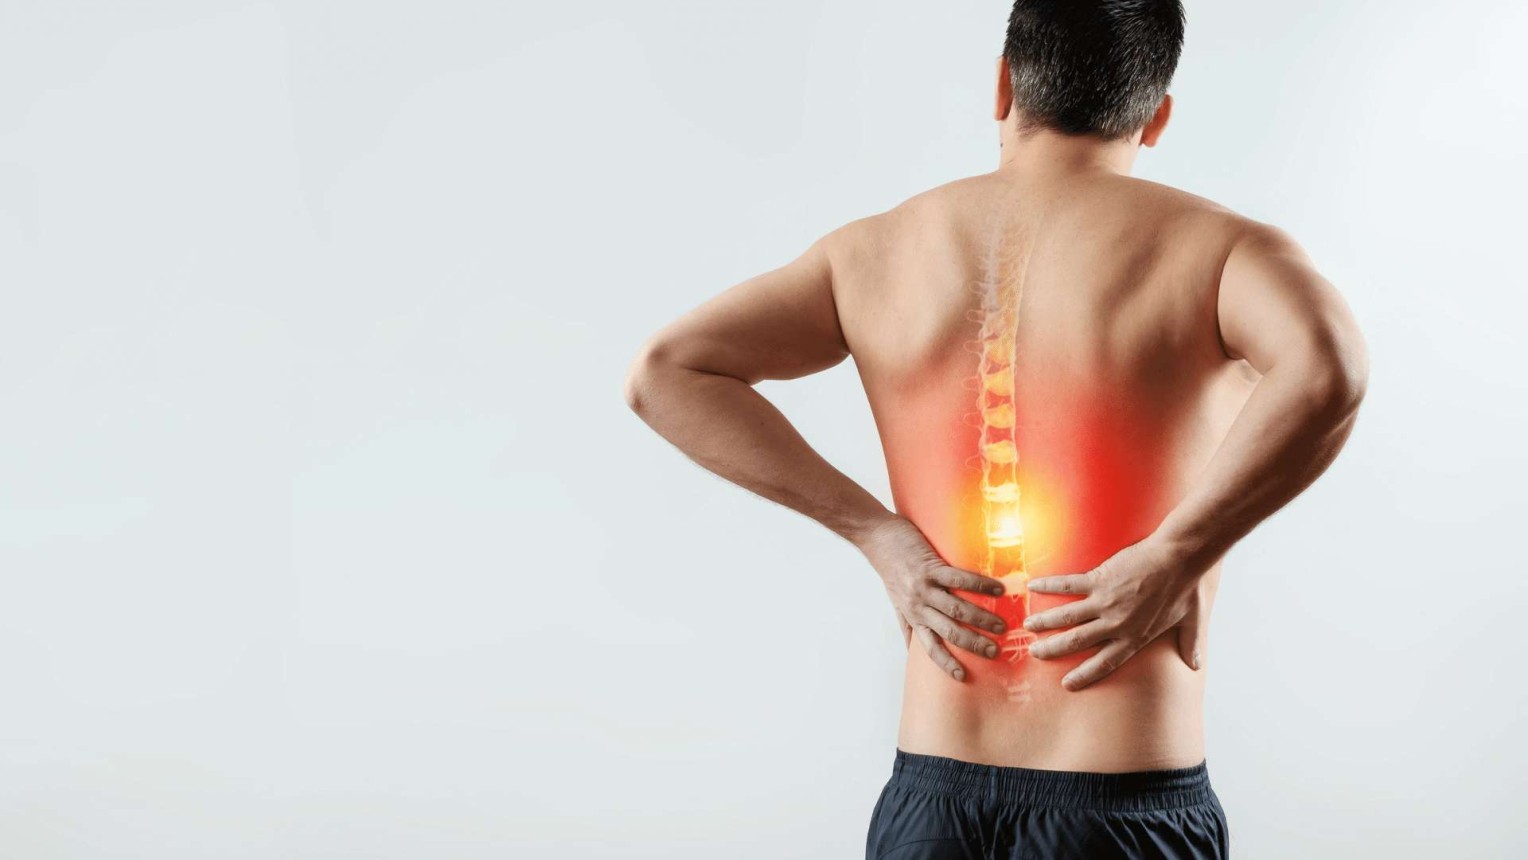 The back of a shirtless man holding his back in pain. His spinal cord is showing through his skin and is highlighted red and yellow signifying pain.